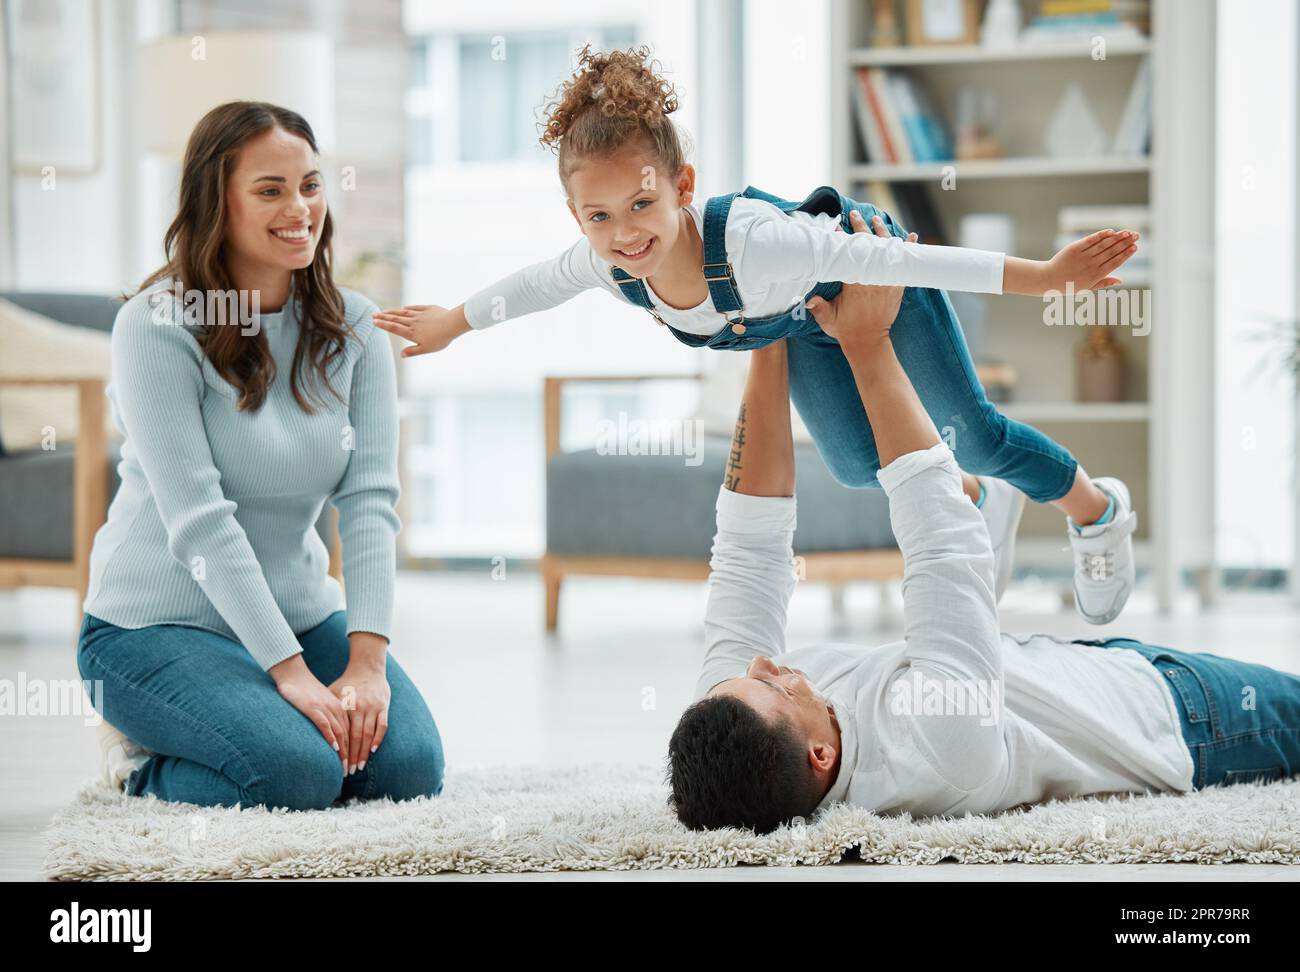 Flying high with dad. a young family playing together at home. Stock Photo